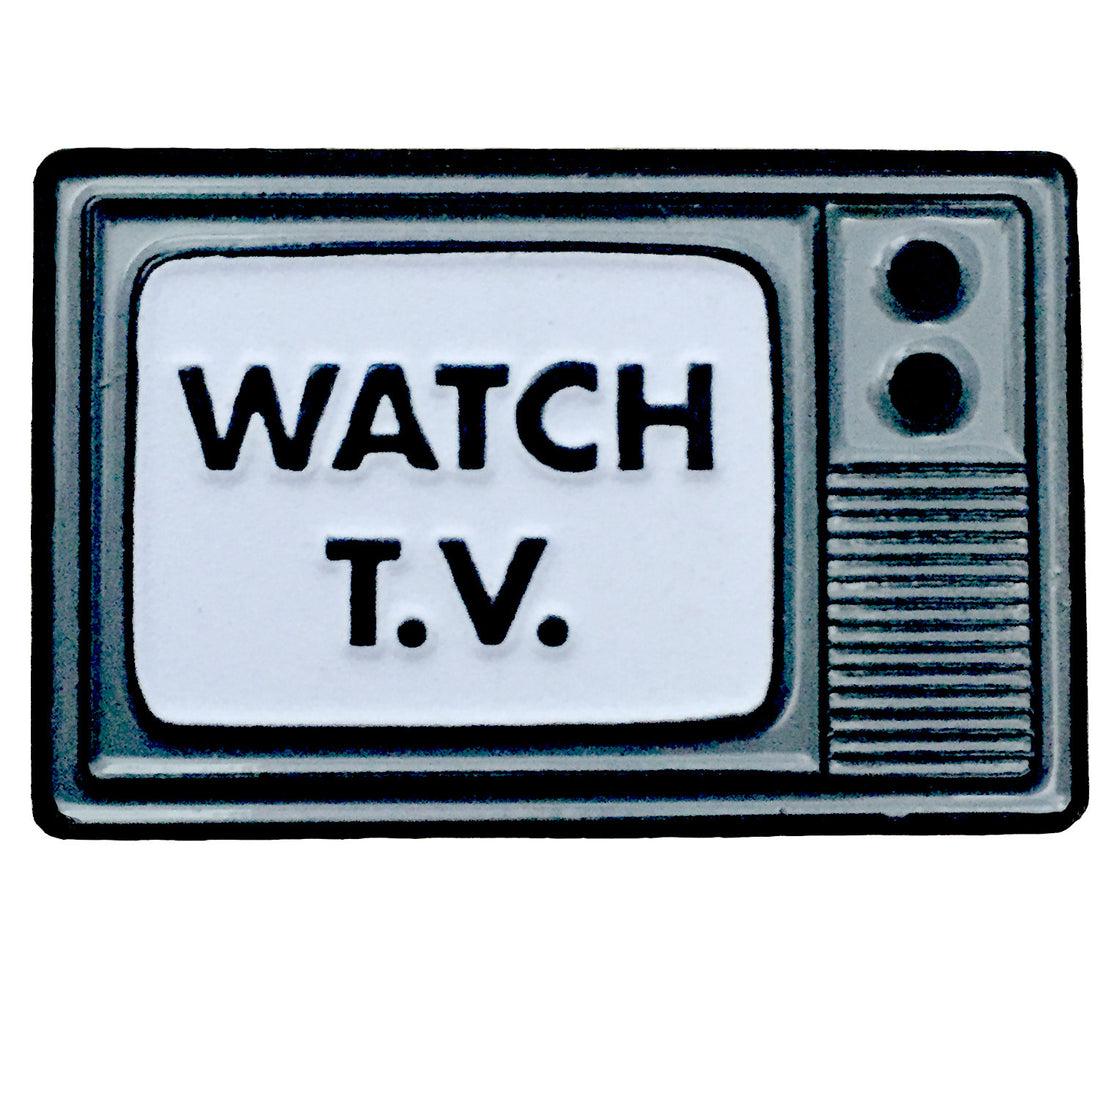 They Live Enamel Pin - Watch T.V.